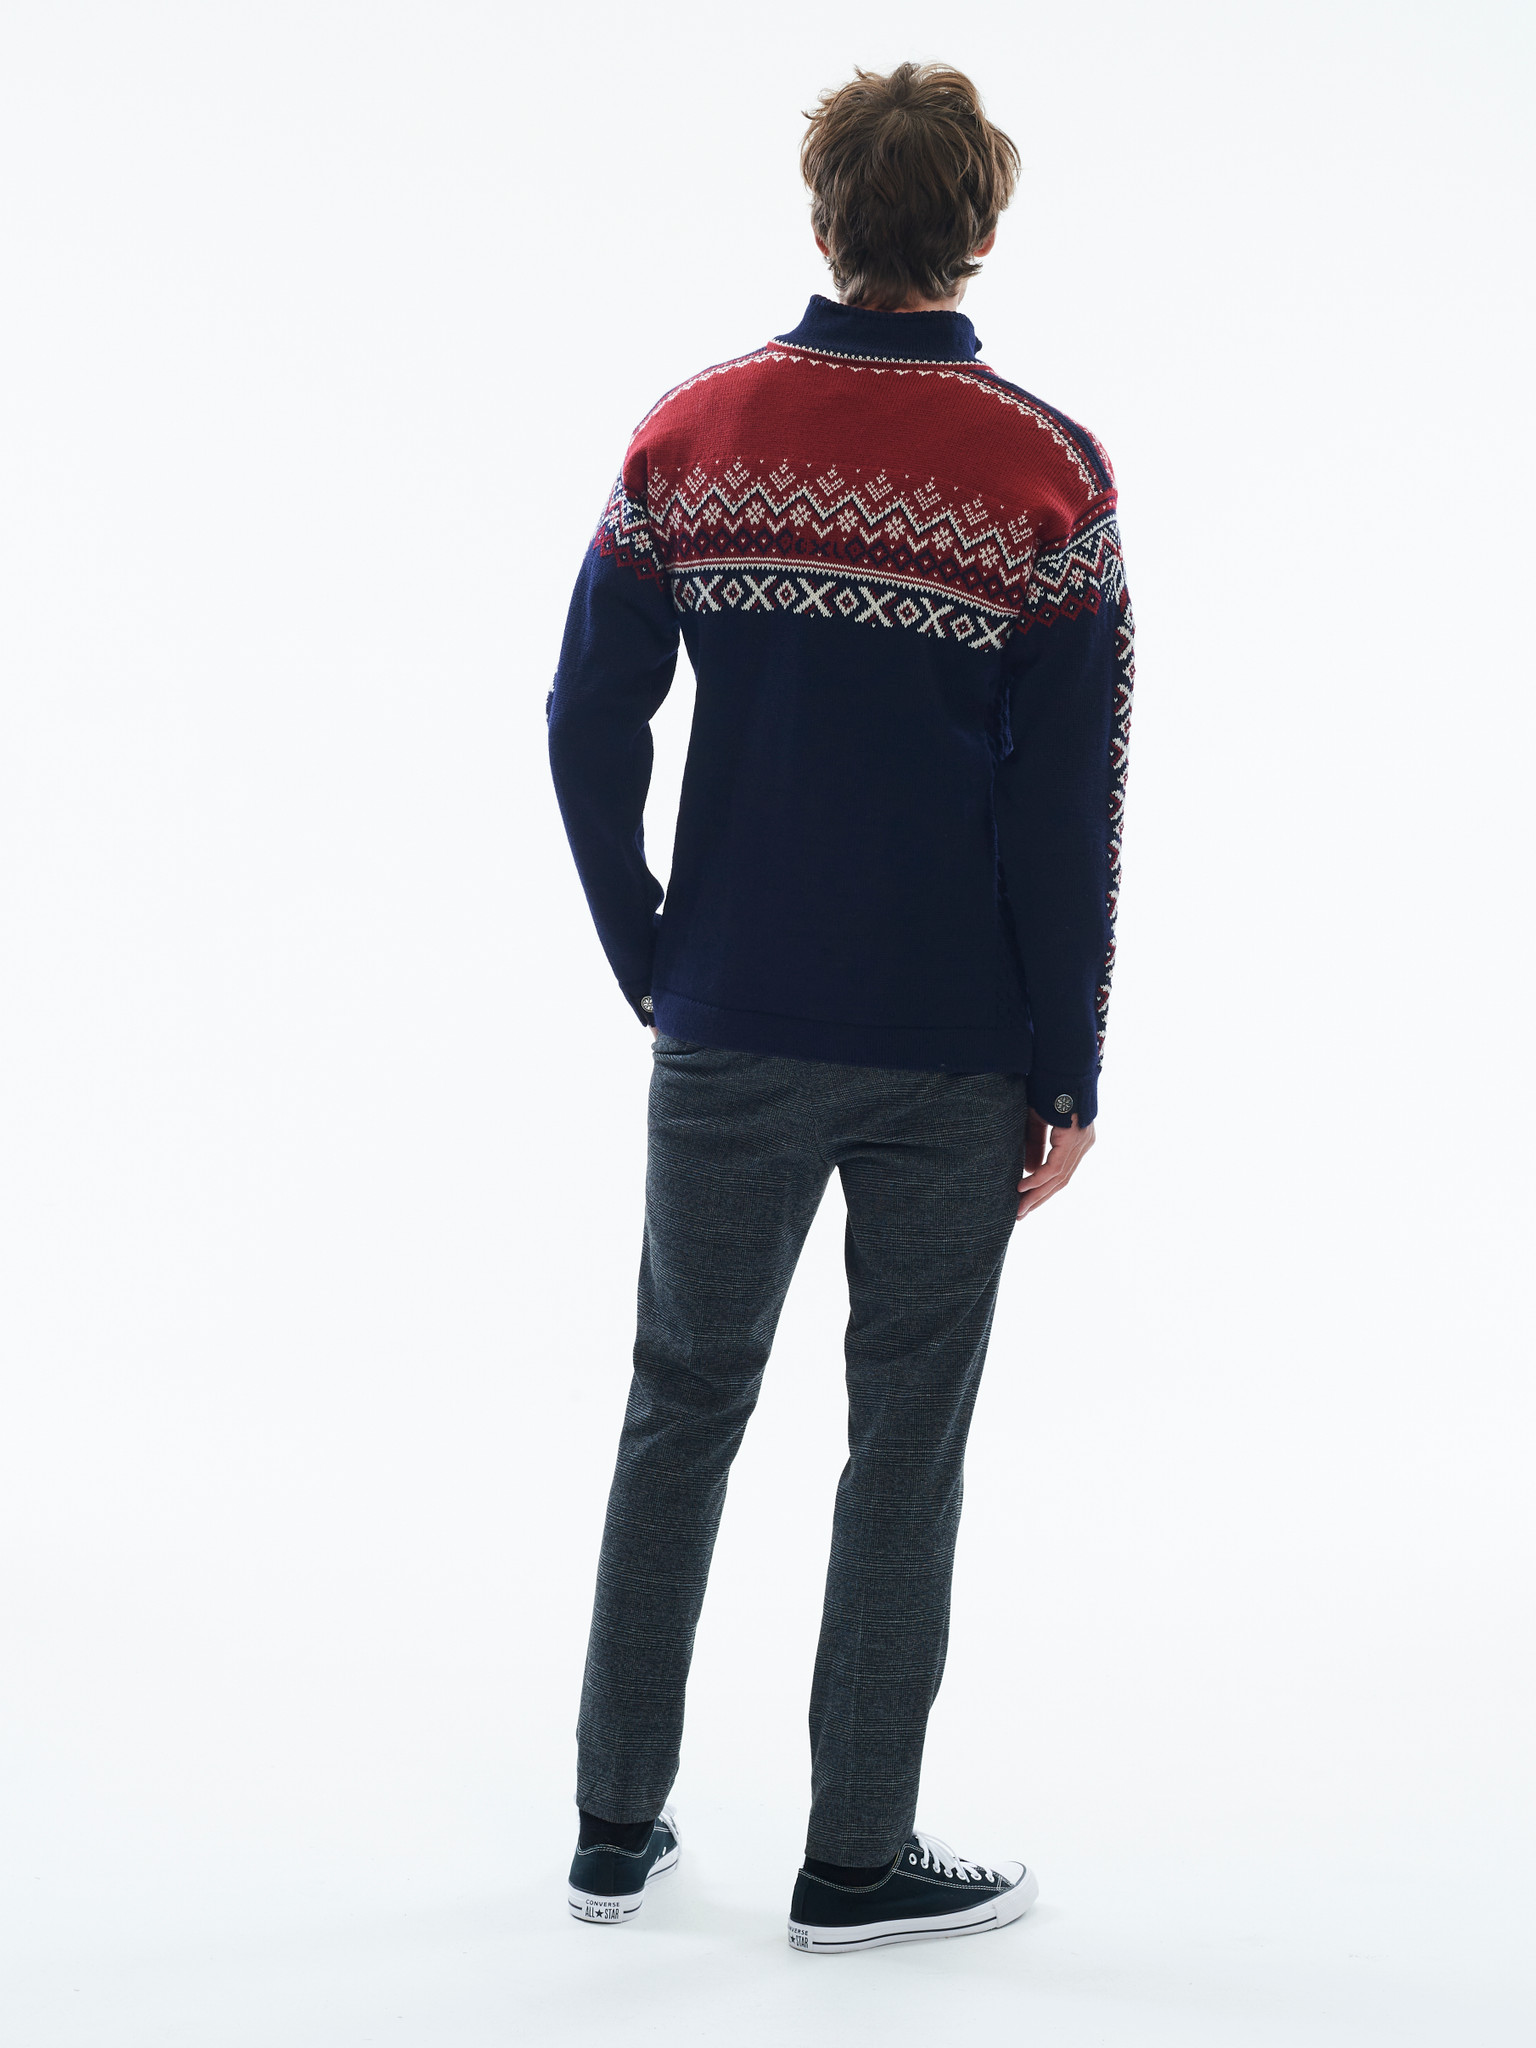 Dale of Norway 140th Anniversary Men's 1/4 Zip Sweater - Navy/Red Rose ...